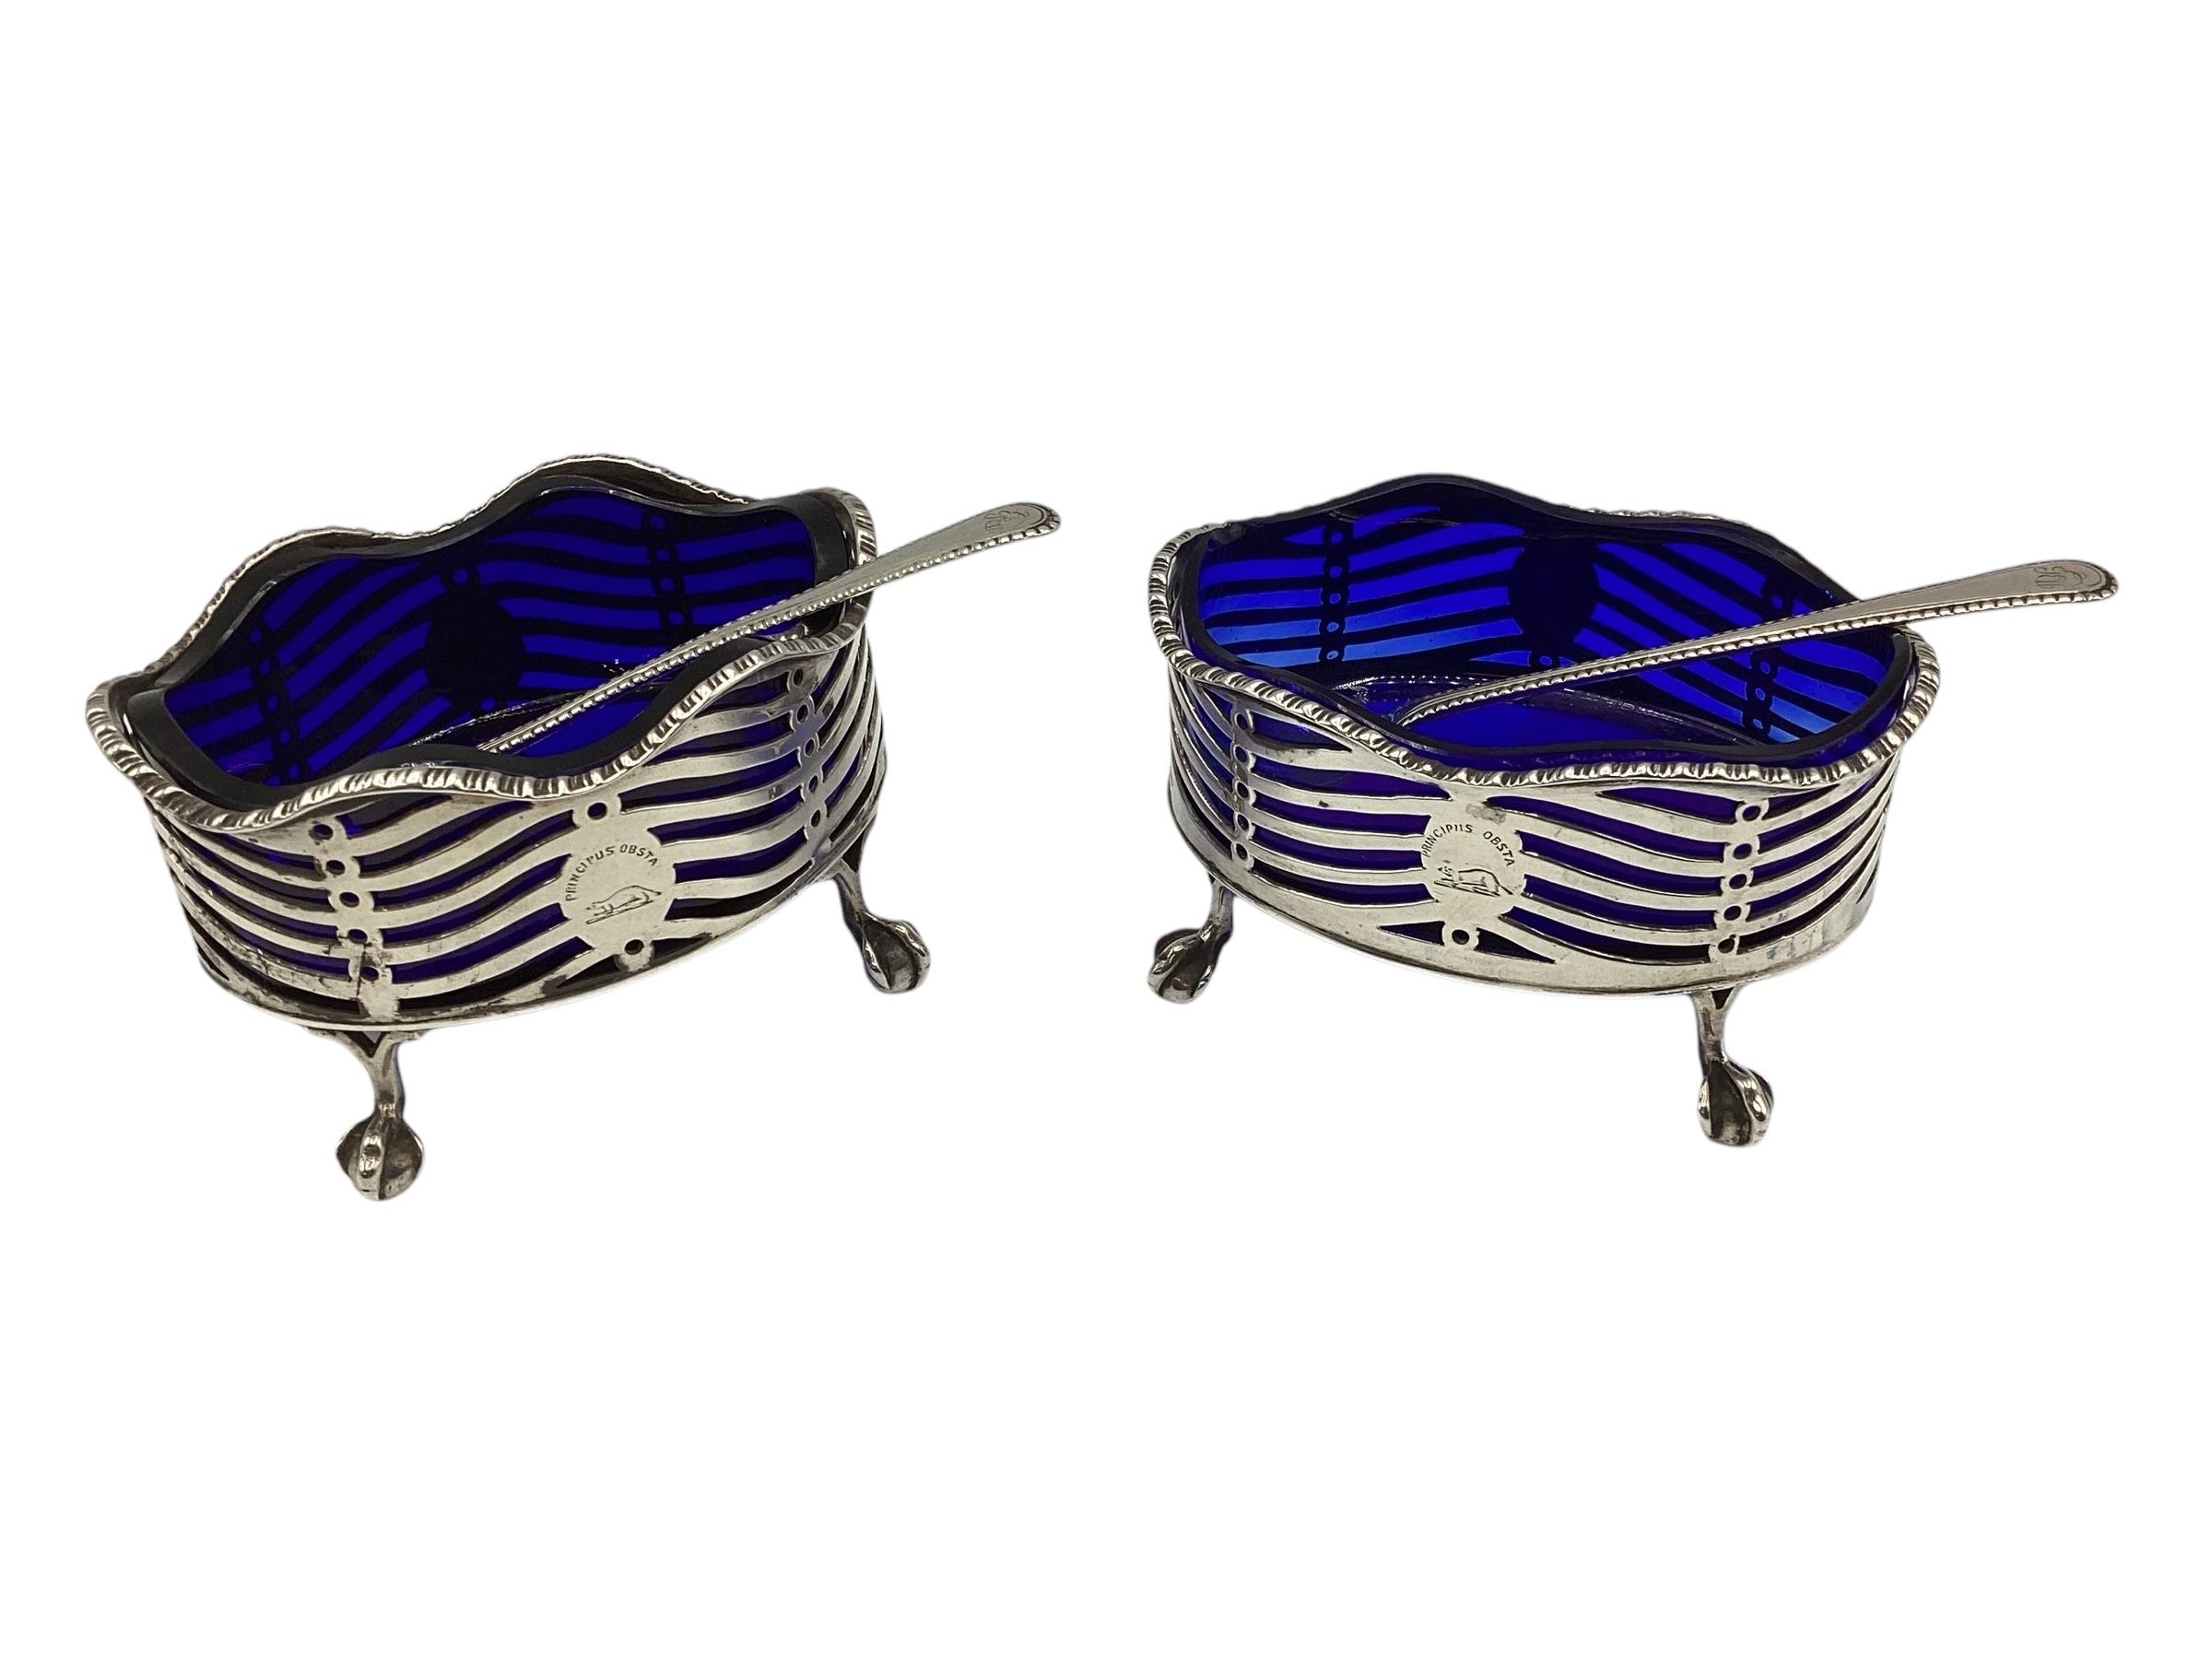 A pair of oval sterling silver salts with blue glass liners, GC London, George Chebsey, with